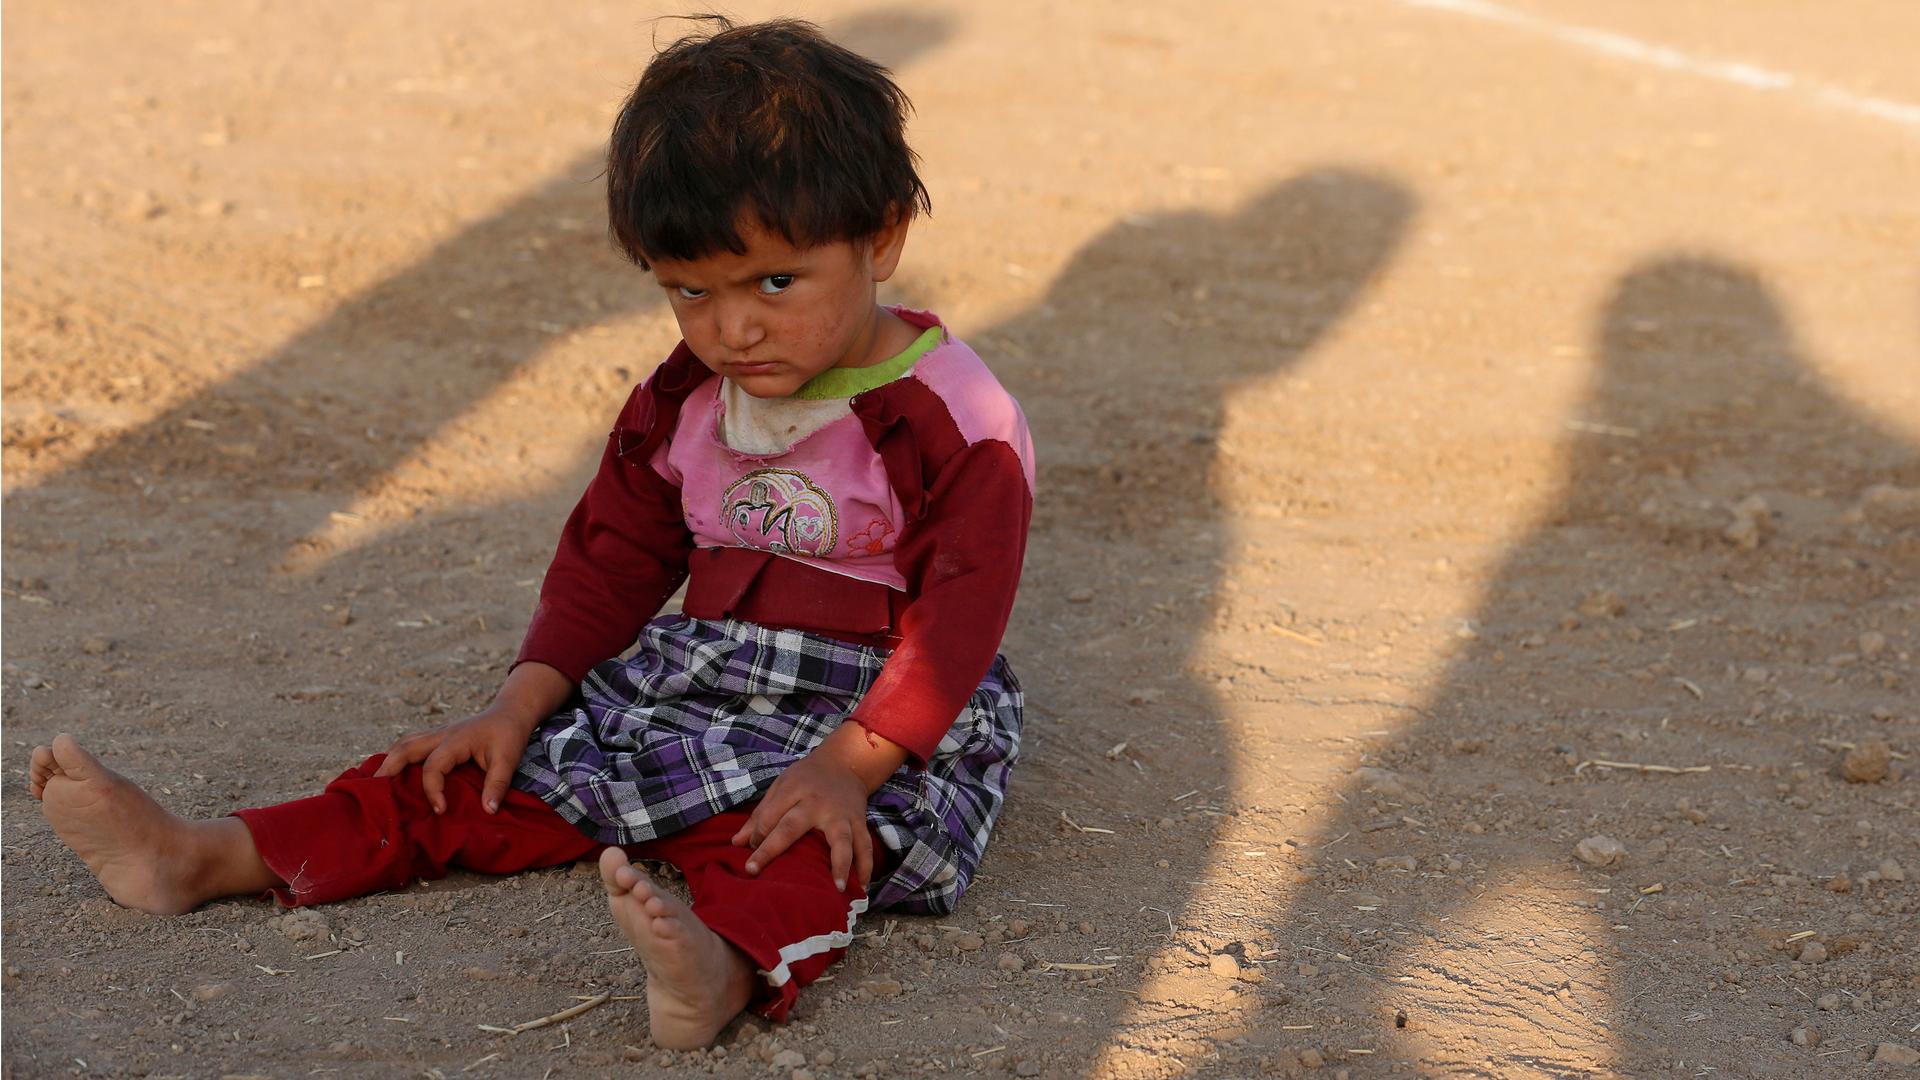 A child from the minority Yazidi sect, who fled violence in the Iraqi town of Sinjar, sits on the ground at Bajed Kadal refugee camp, southwest of Dohuk province August 23, 2014.